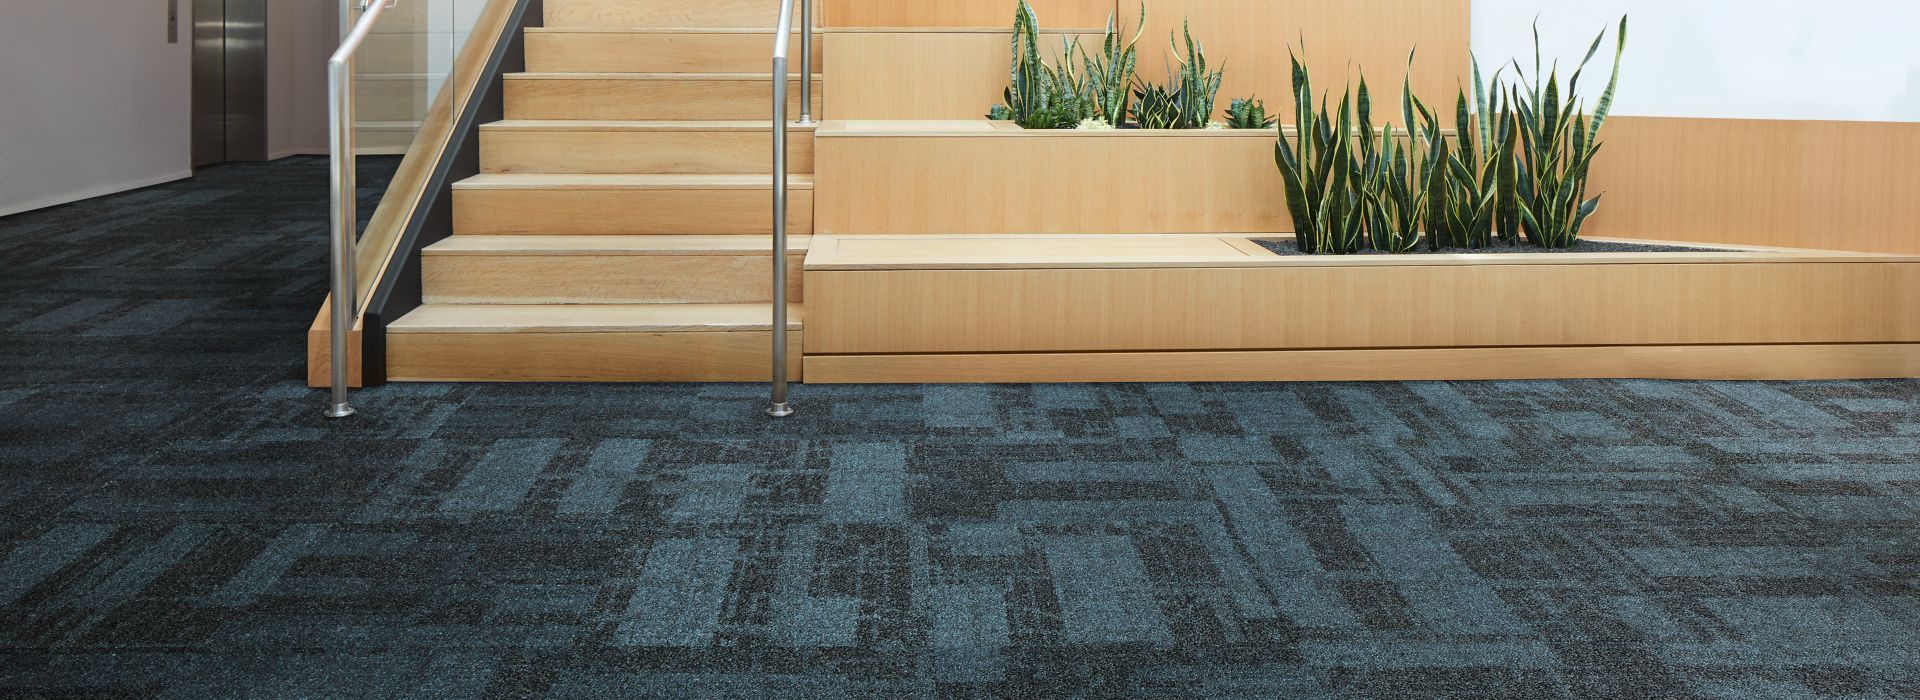 Interface Dynamic Duo carpet tile in entryway with stairs  numéro d’image 2